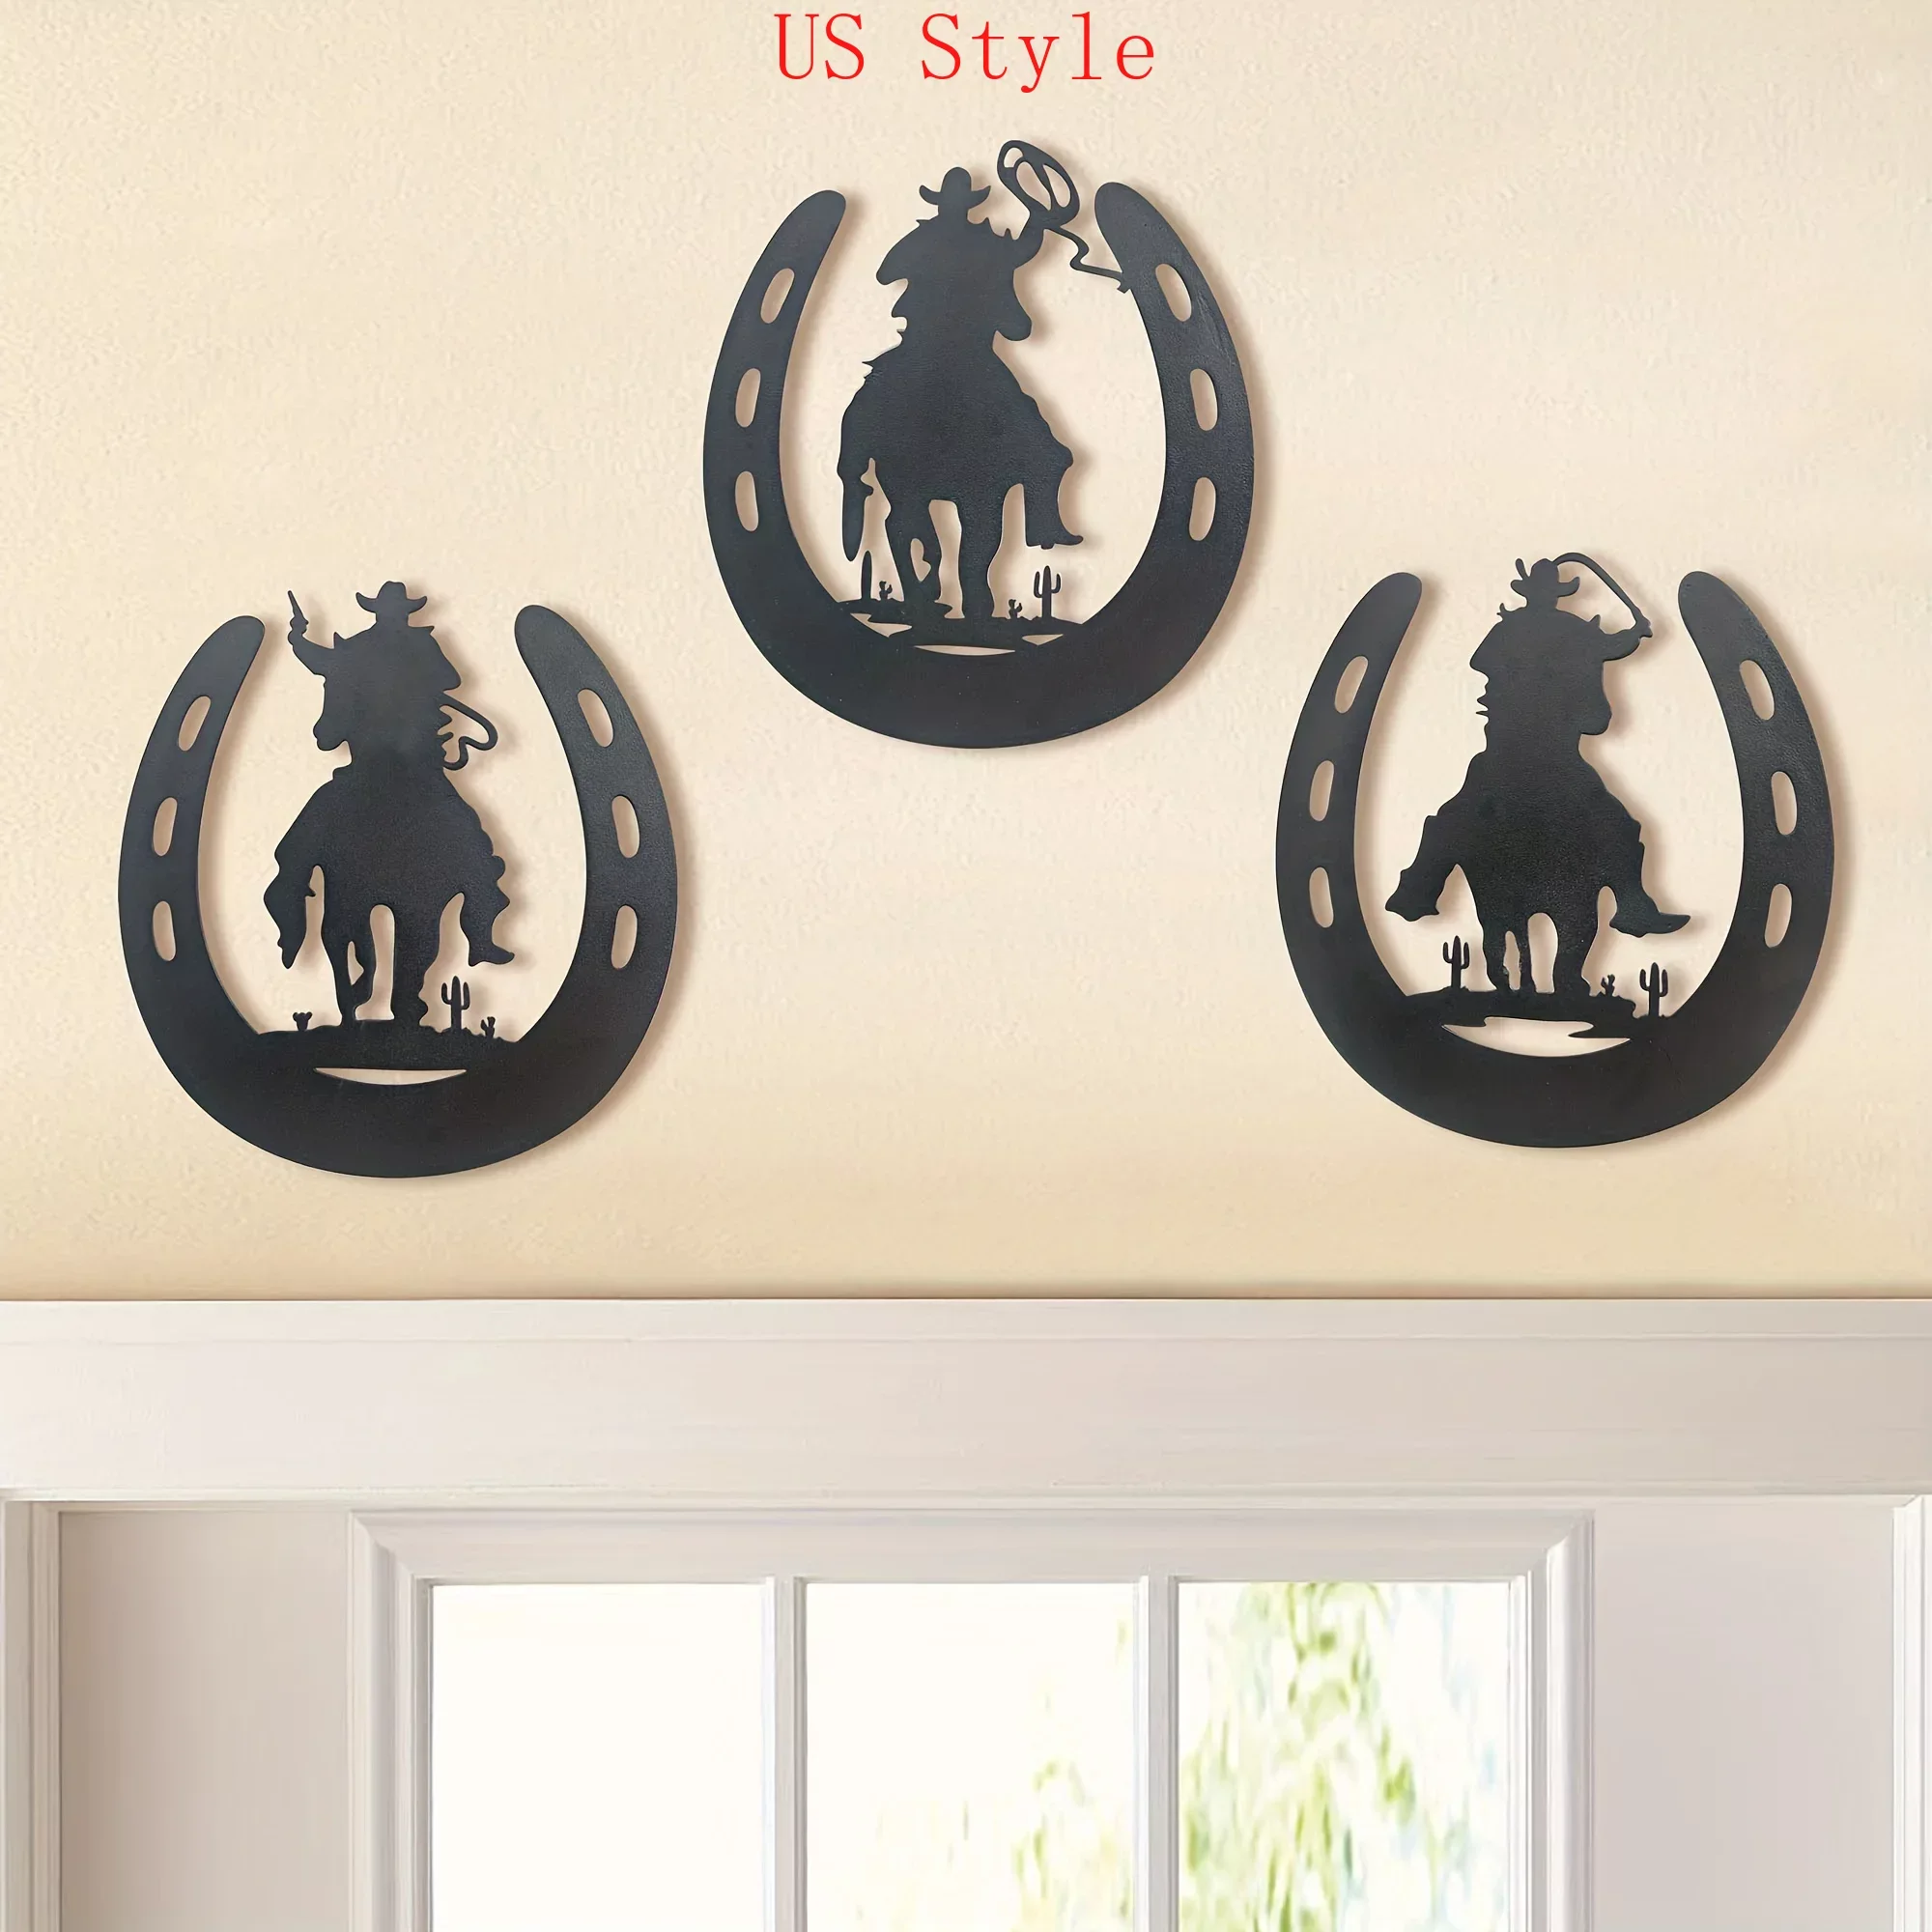 

Horseshoe Metal Home Art Decor with Cowboy, Western Rustic Style Horse Shoes Decoration Wall Hanging Living Room Country Decor G